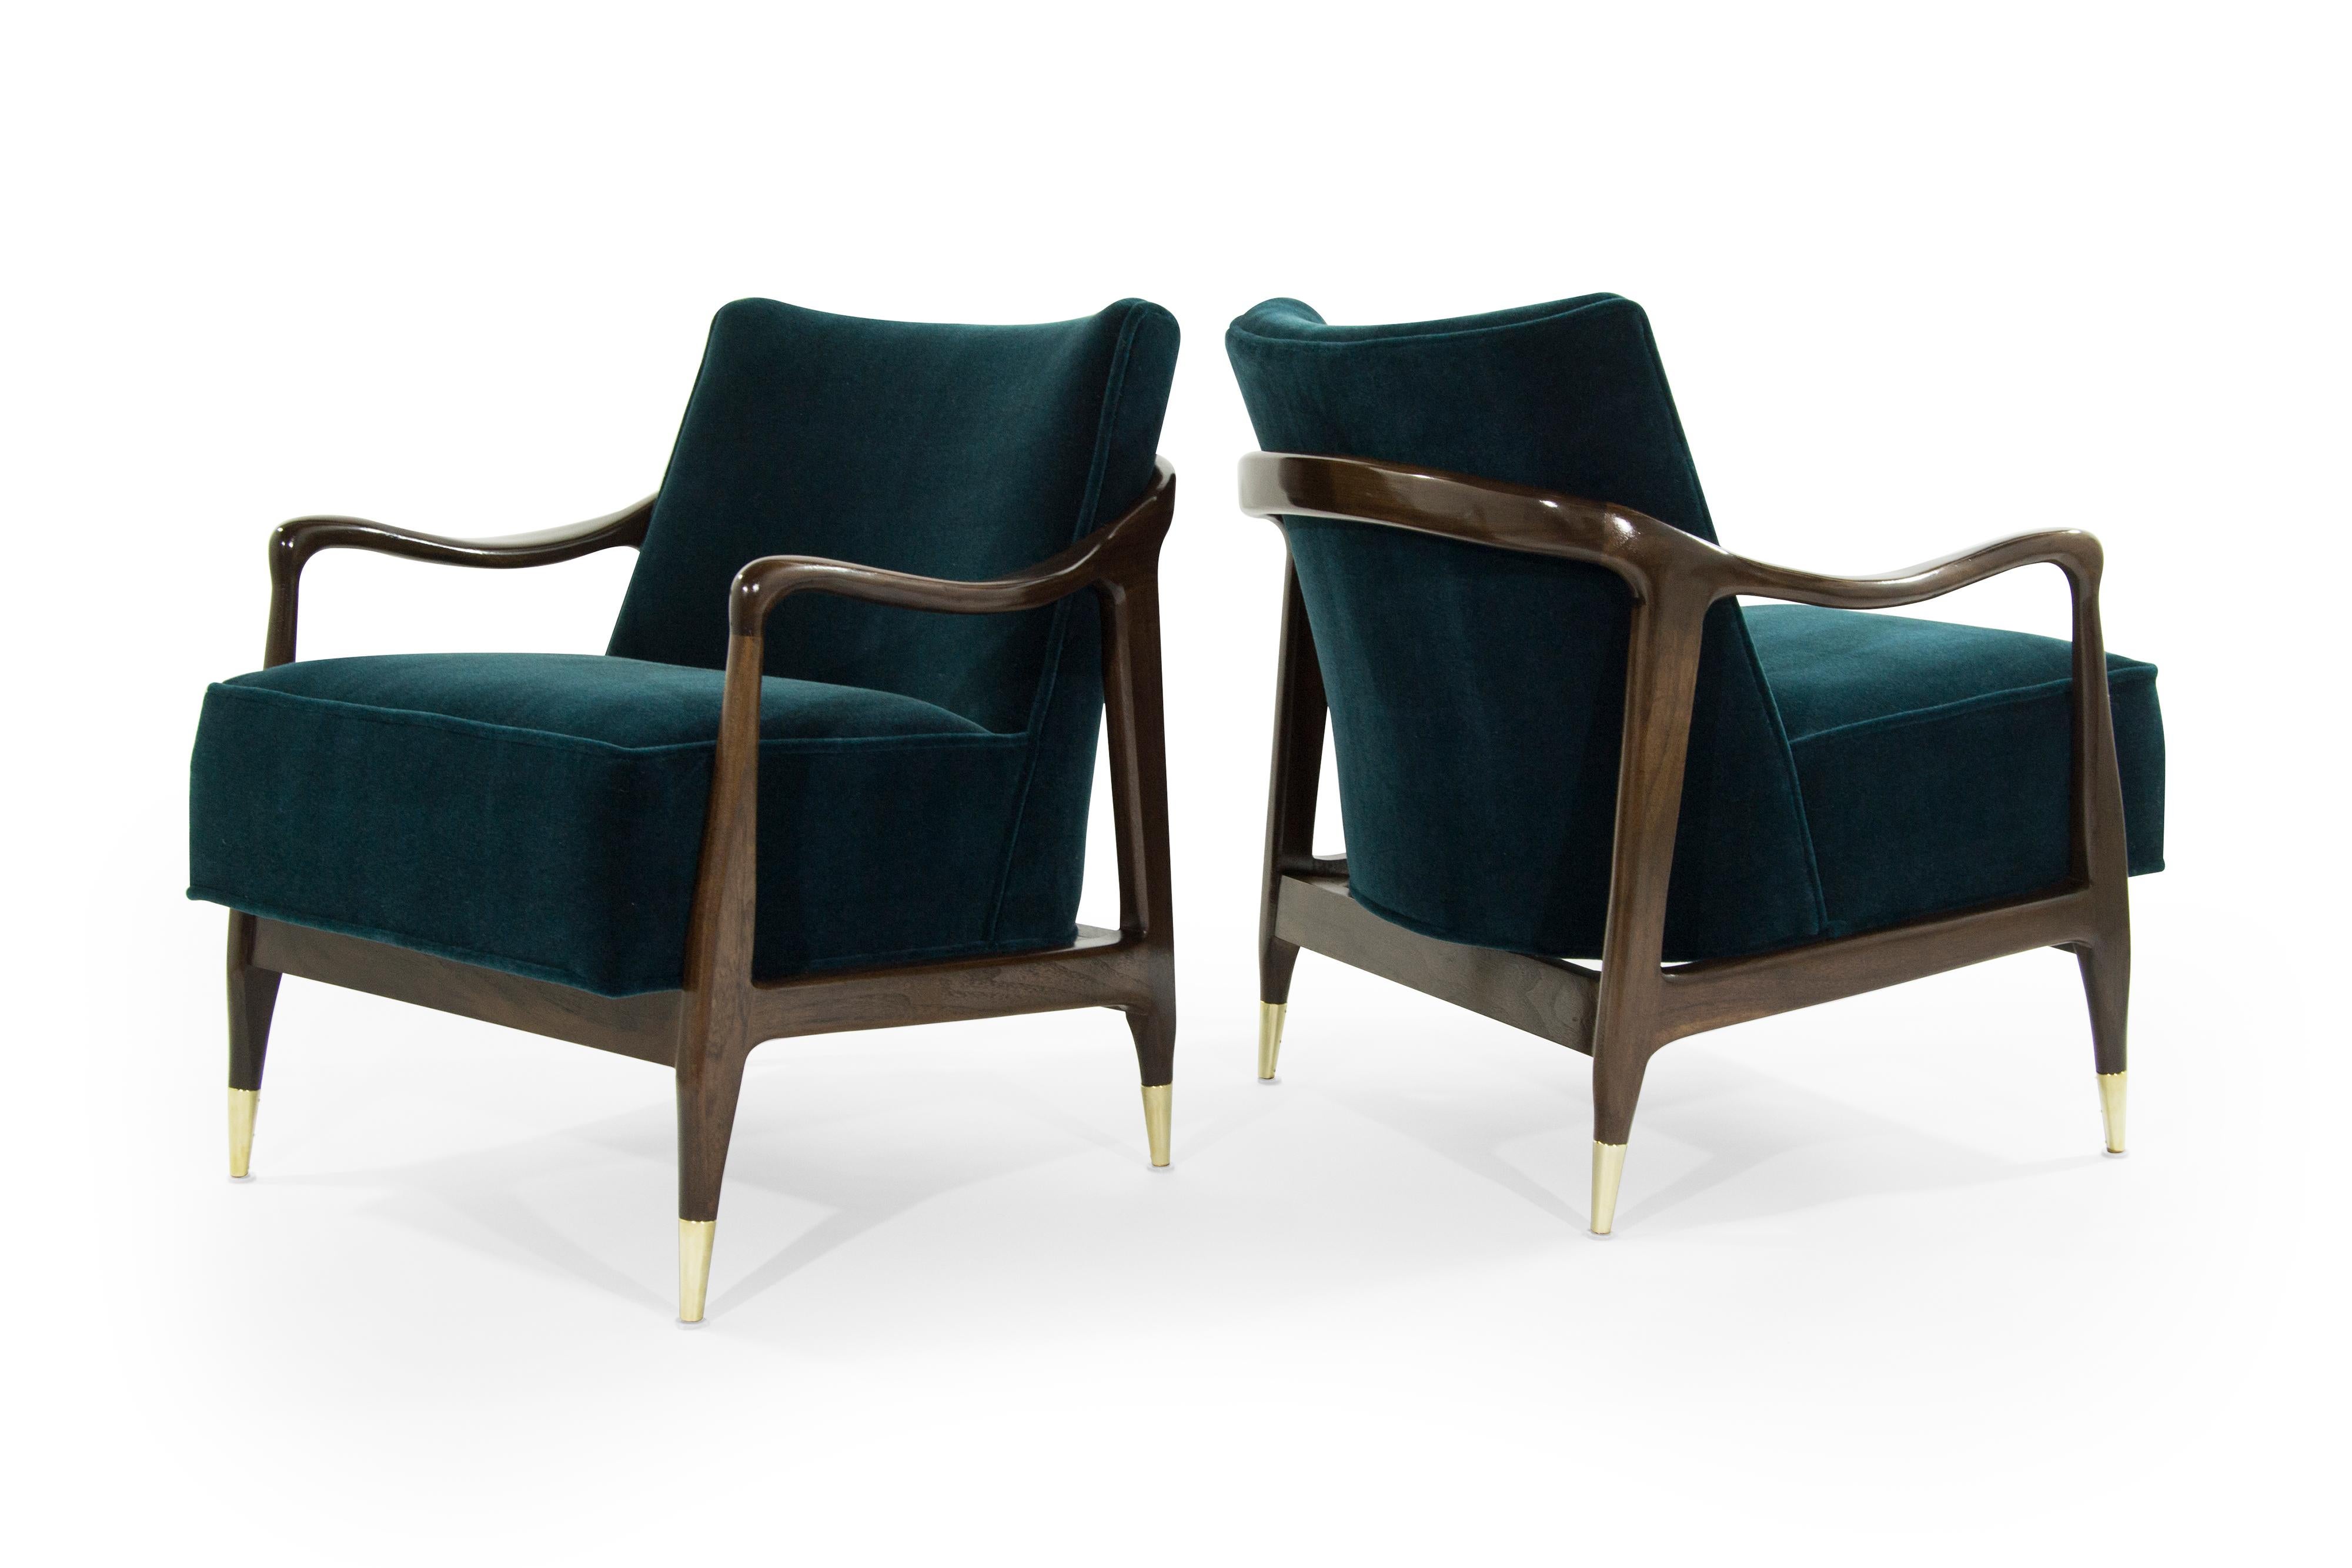 Brass Midcentury Sculptural Gio Ponti Style Walnut Lounge Chairs, 1950s